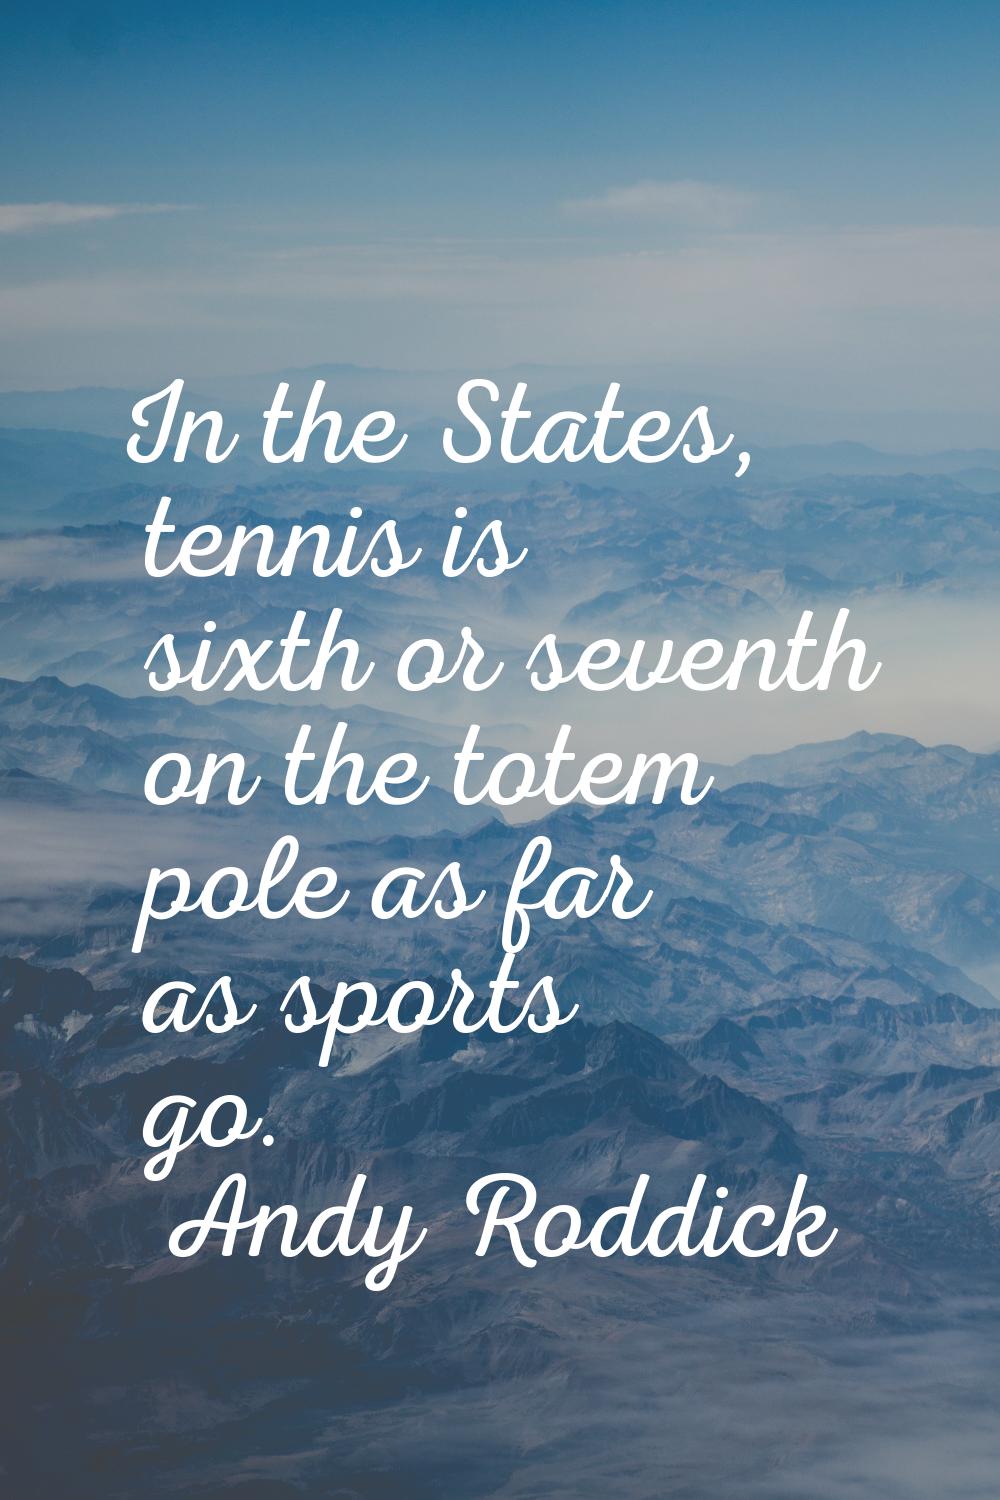 In the States, tennis is sixth or seventh on the totem pole as far as sports go.